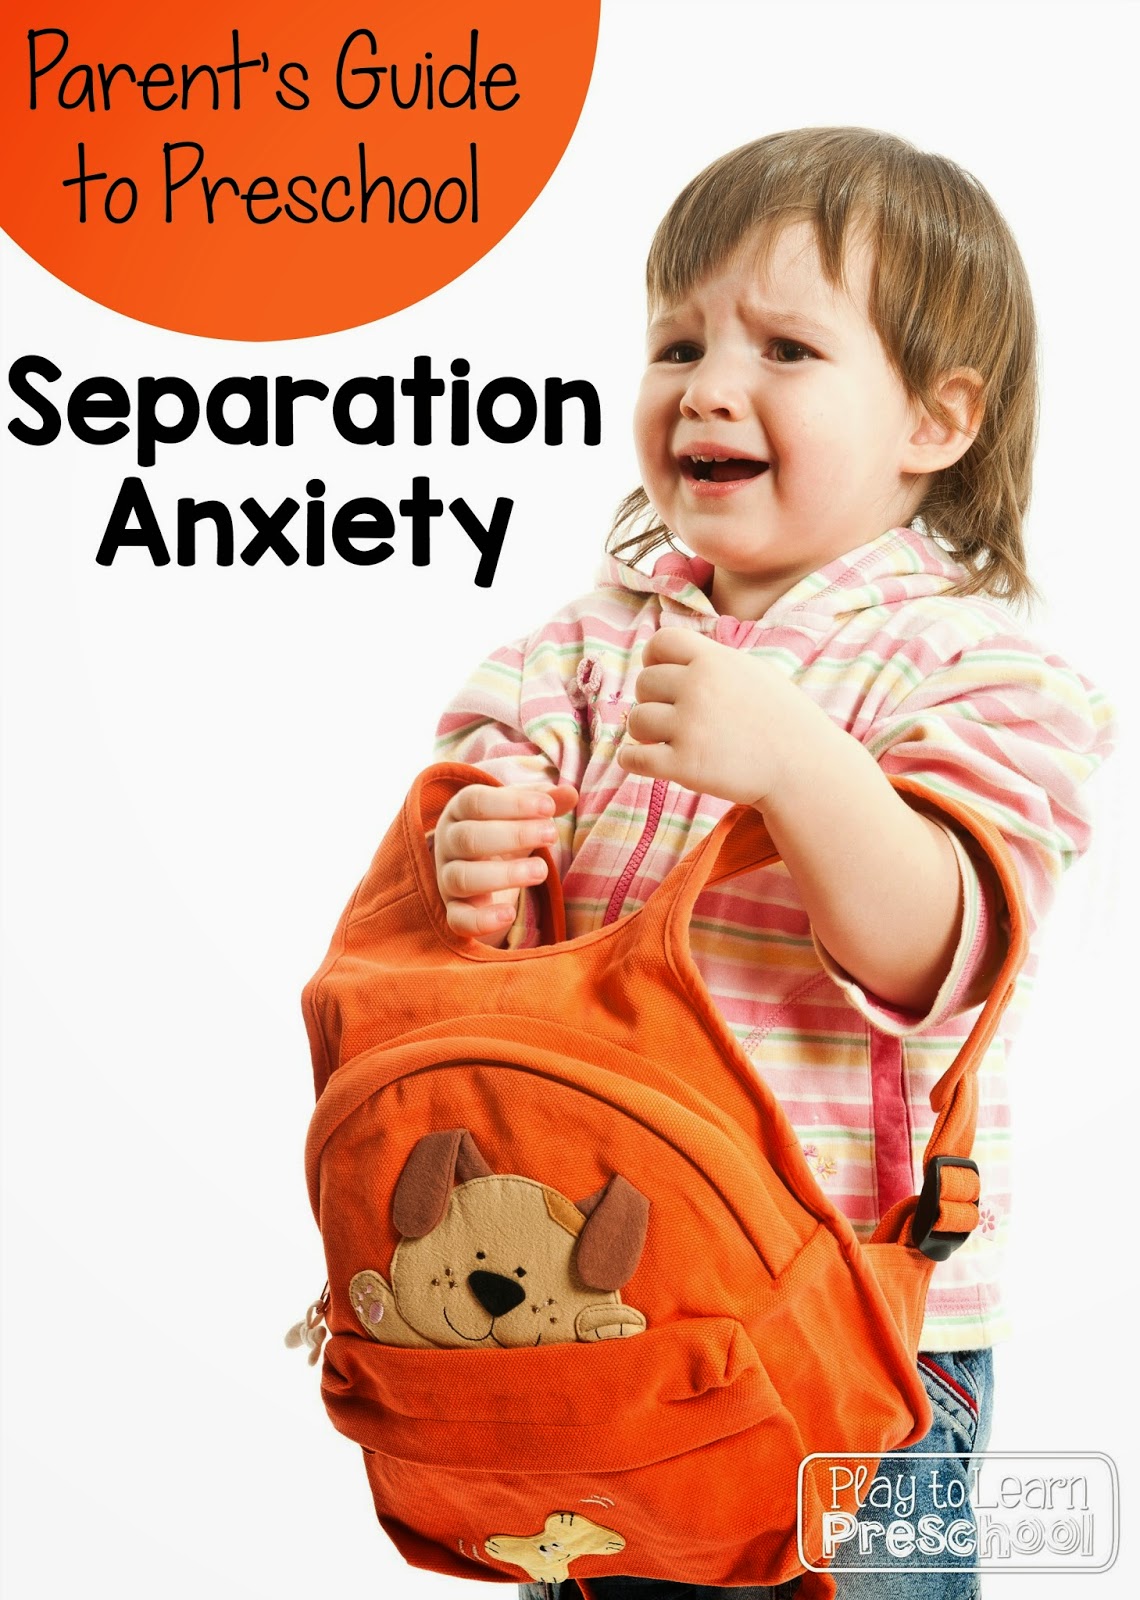 How to Handle Separation Anxiety A Parents' Guide